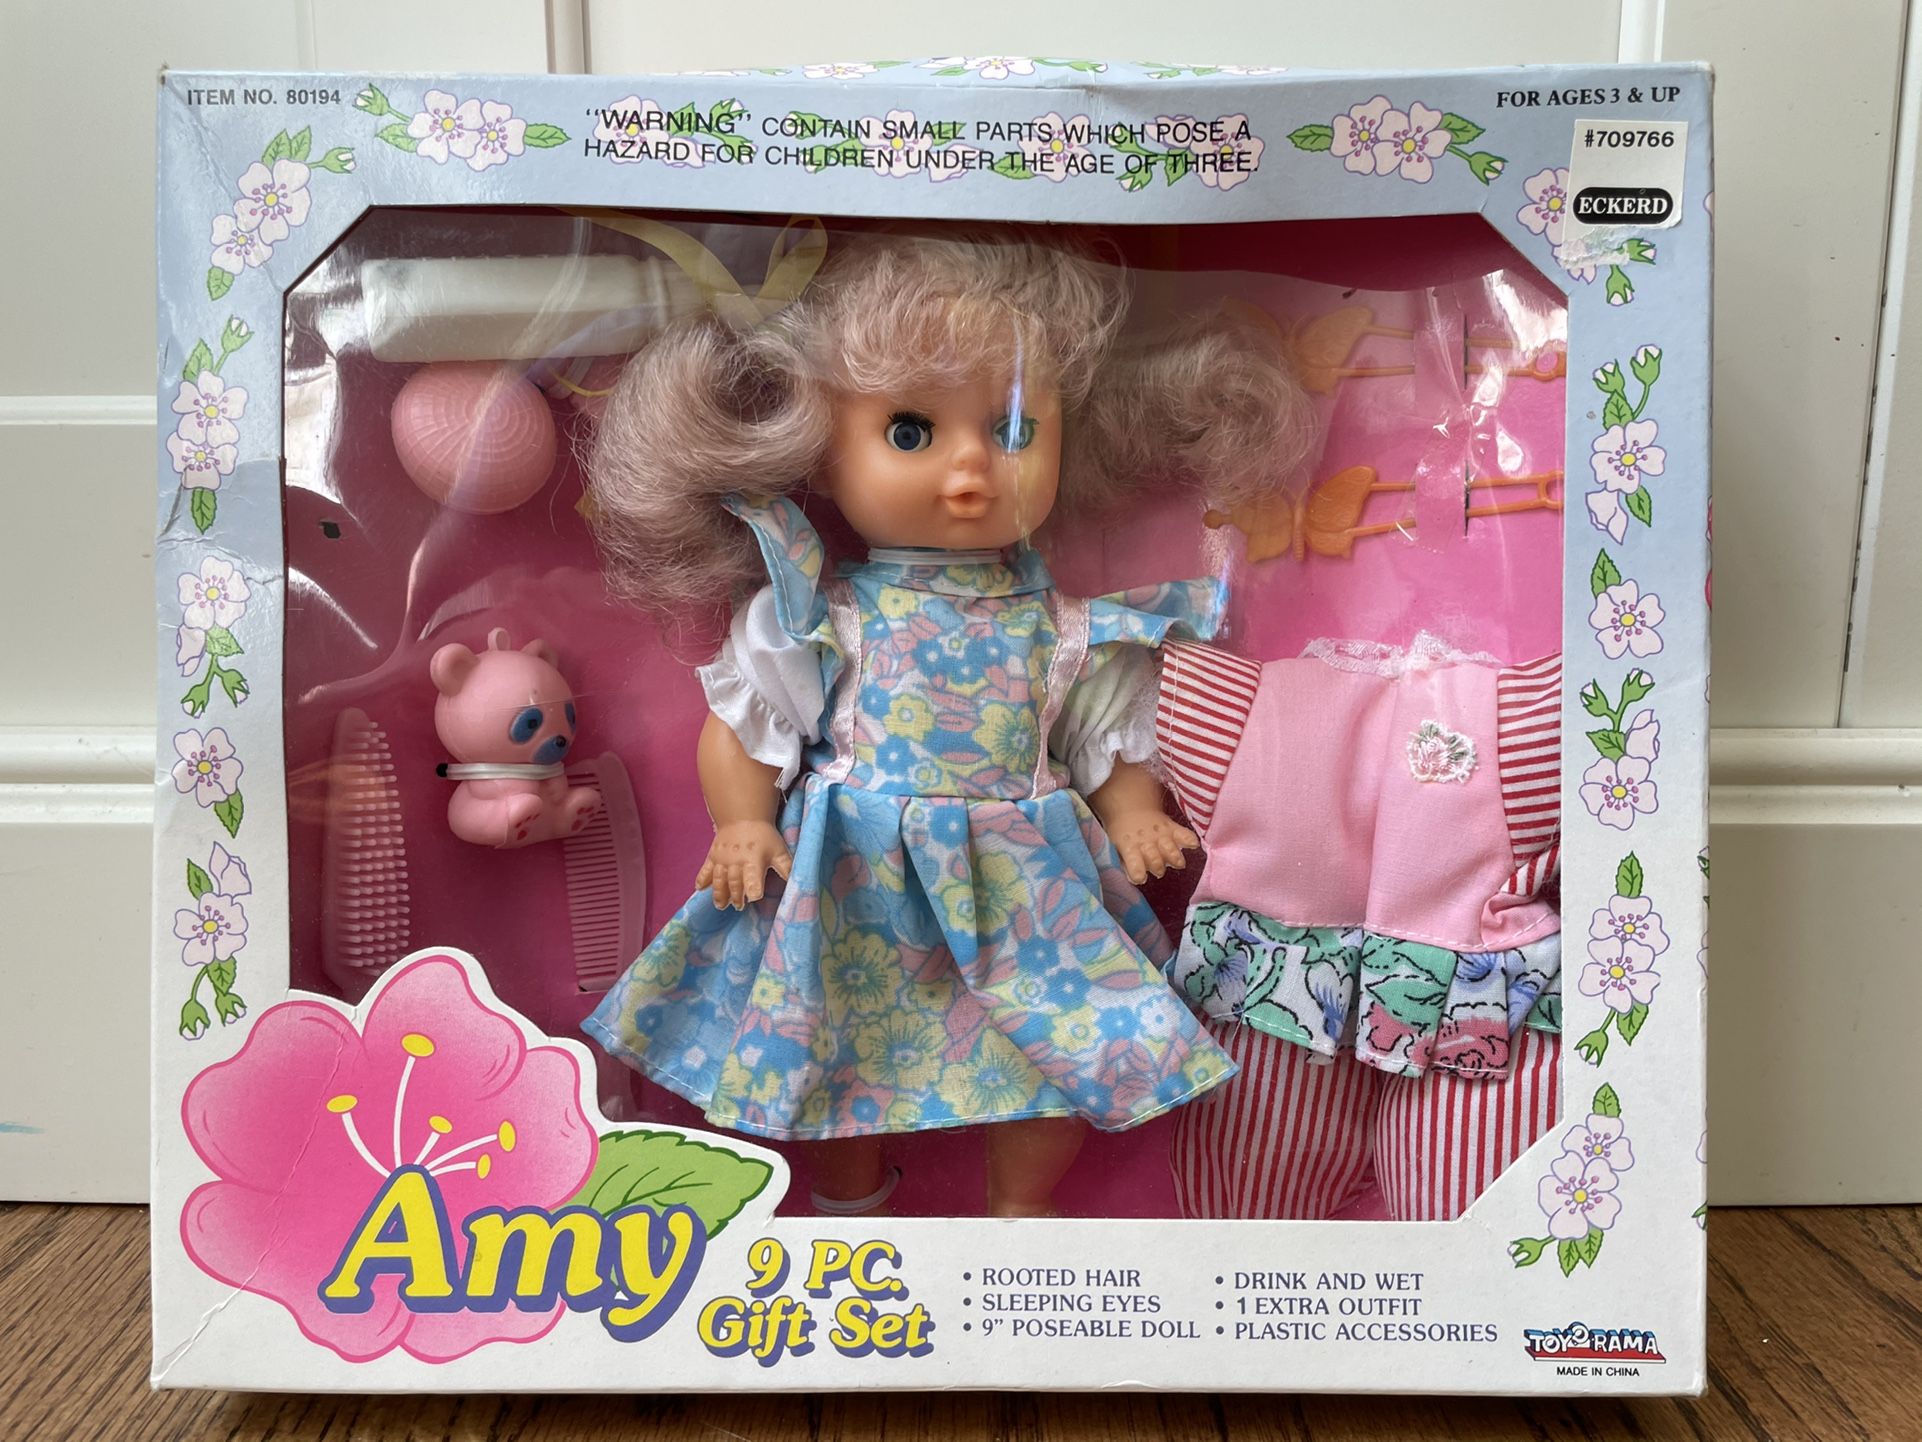 Vintage 1993 Amy 9 PC Gift Set Eckerd Toy O Rama 9” Doll- ULTRA RARE! This vintage 90’s Toy O Rama gift set doll is very rare and hard to find and so 